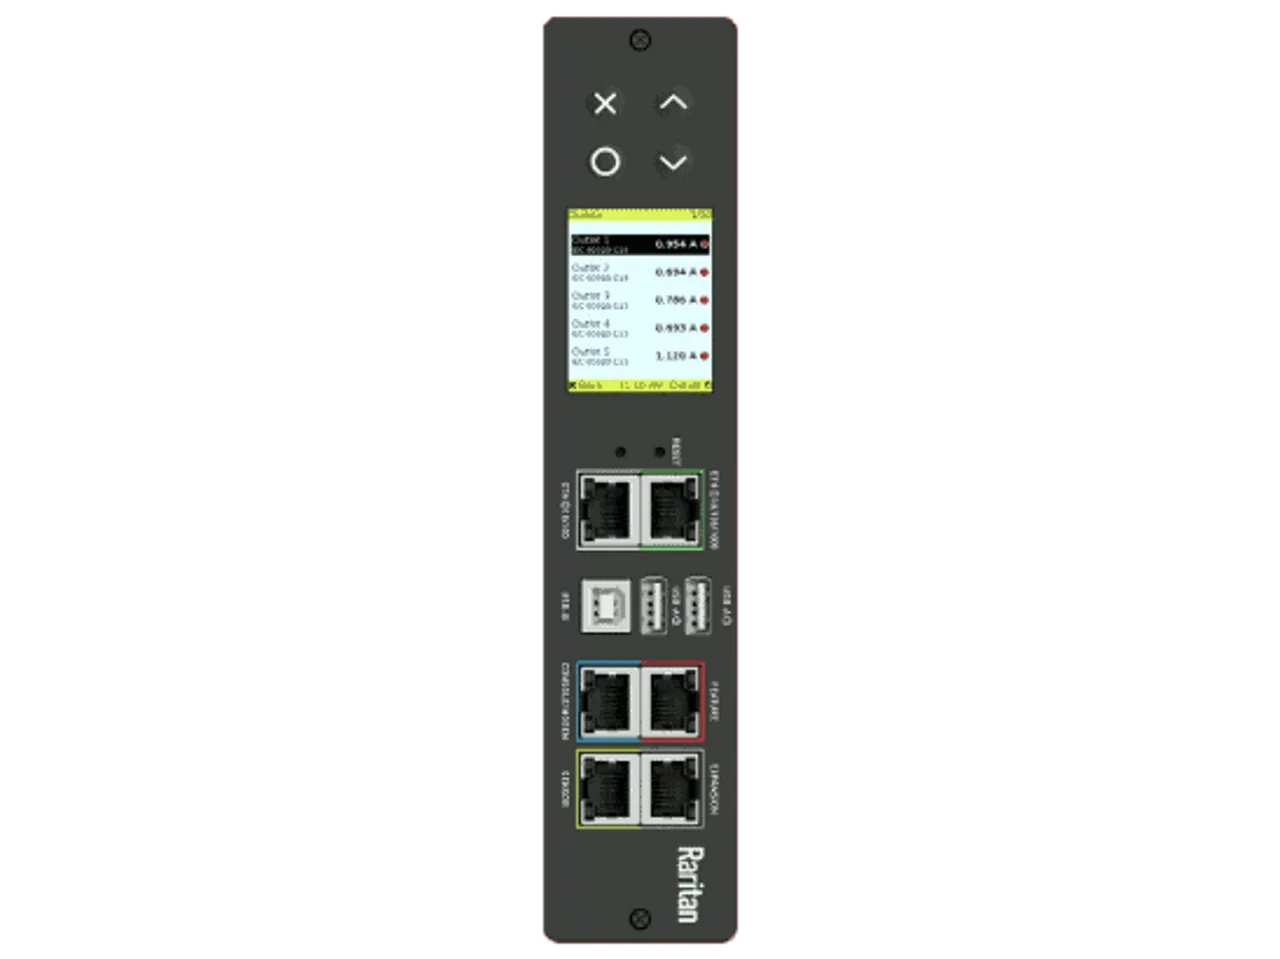 Raritan Launches Intelligent Rack PDUs with new the iX7 Onboard Controller 